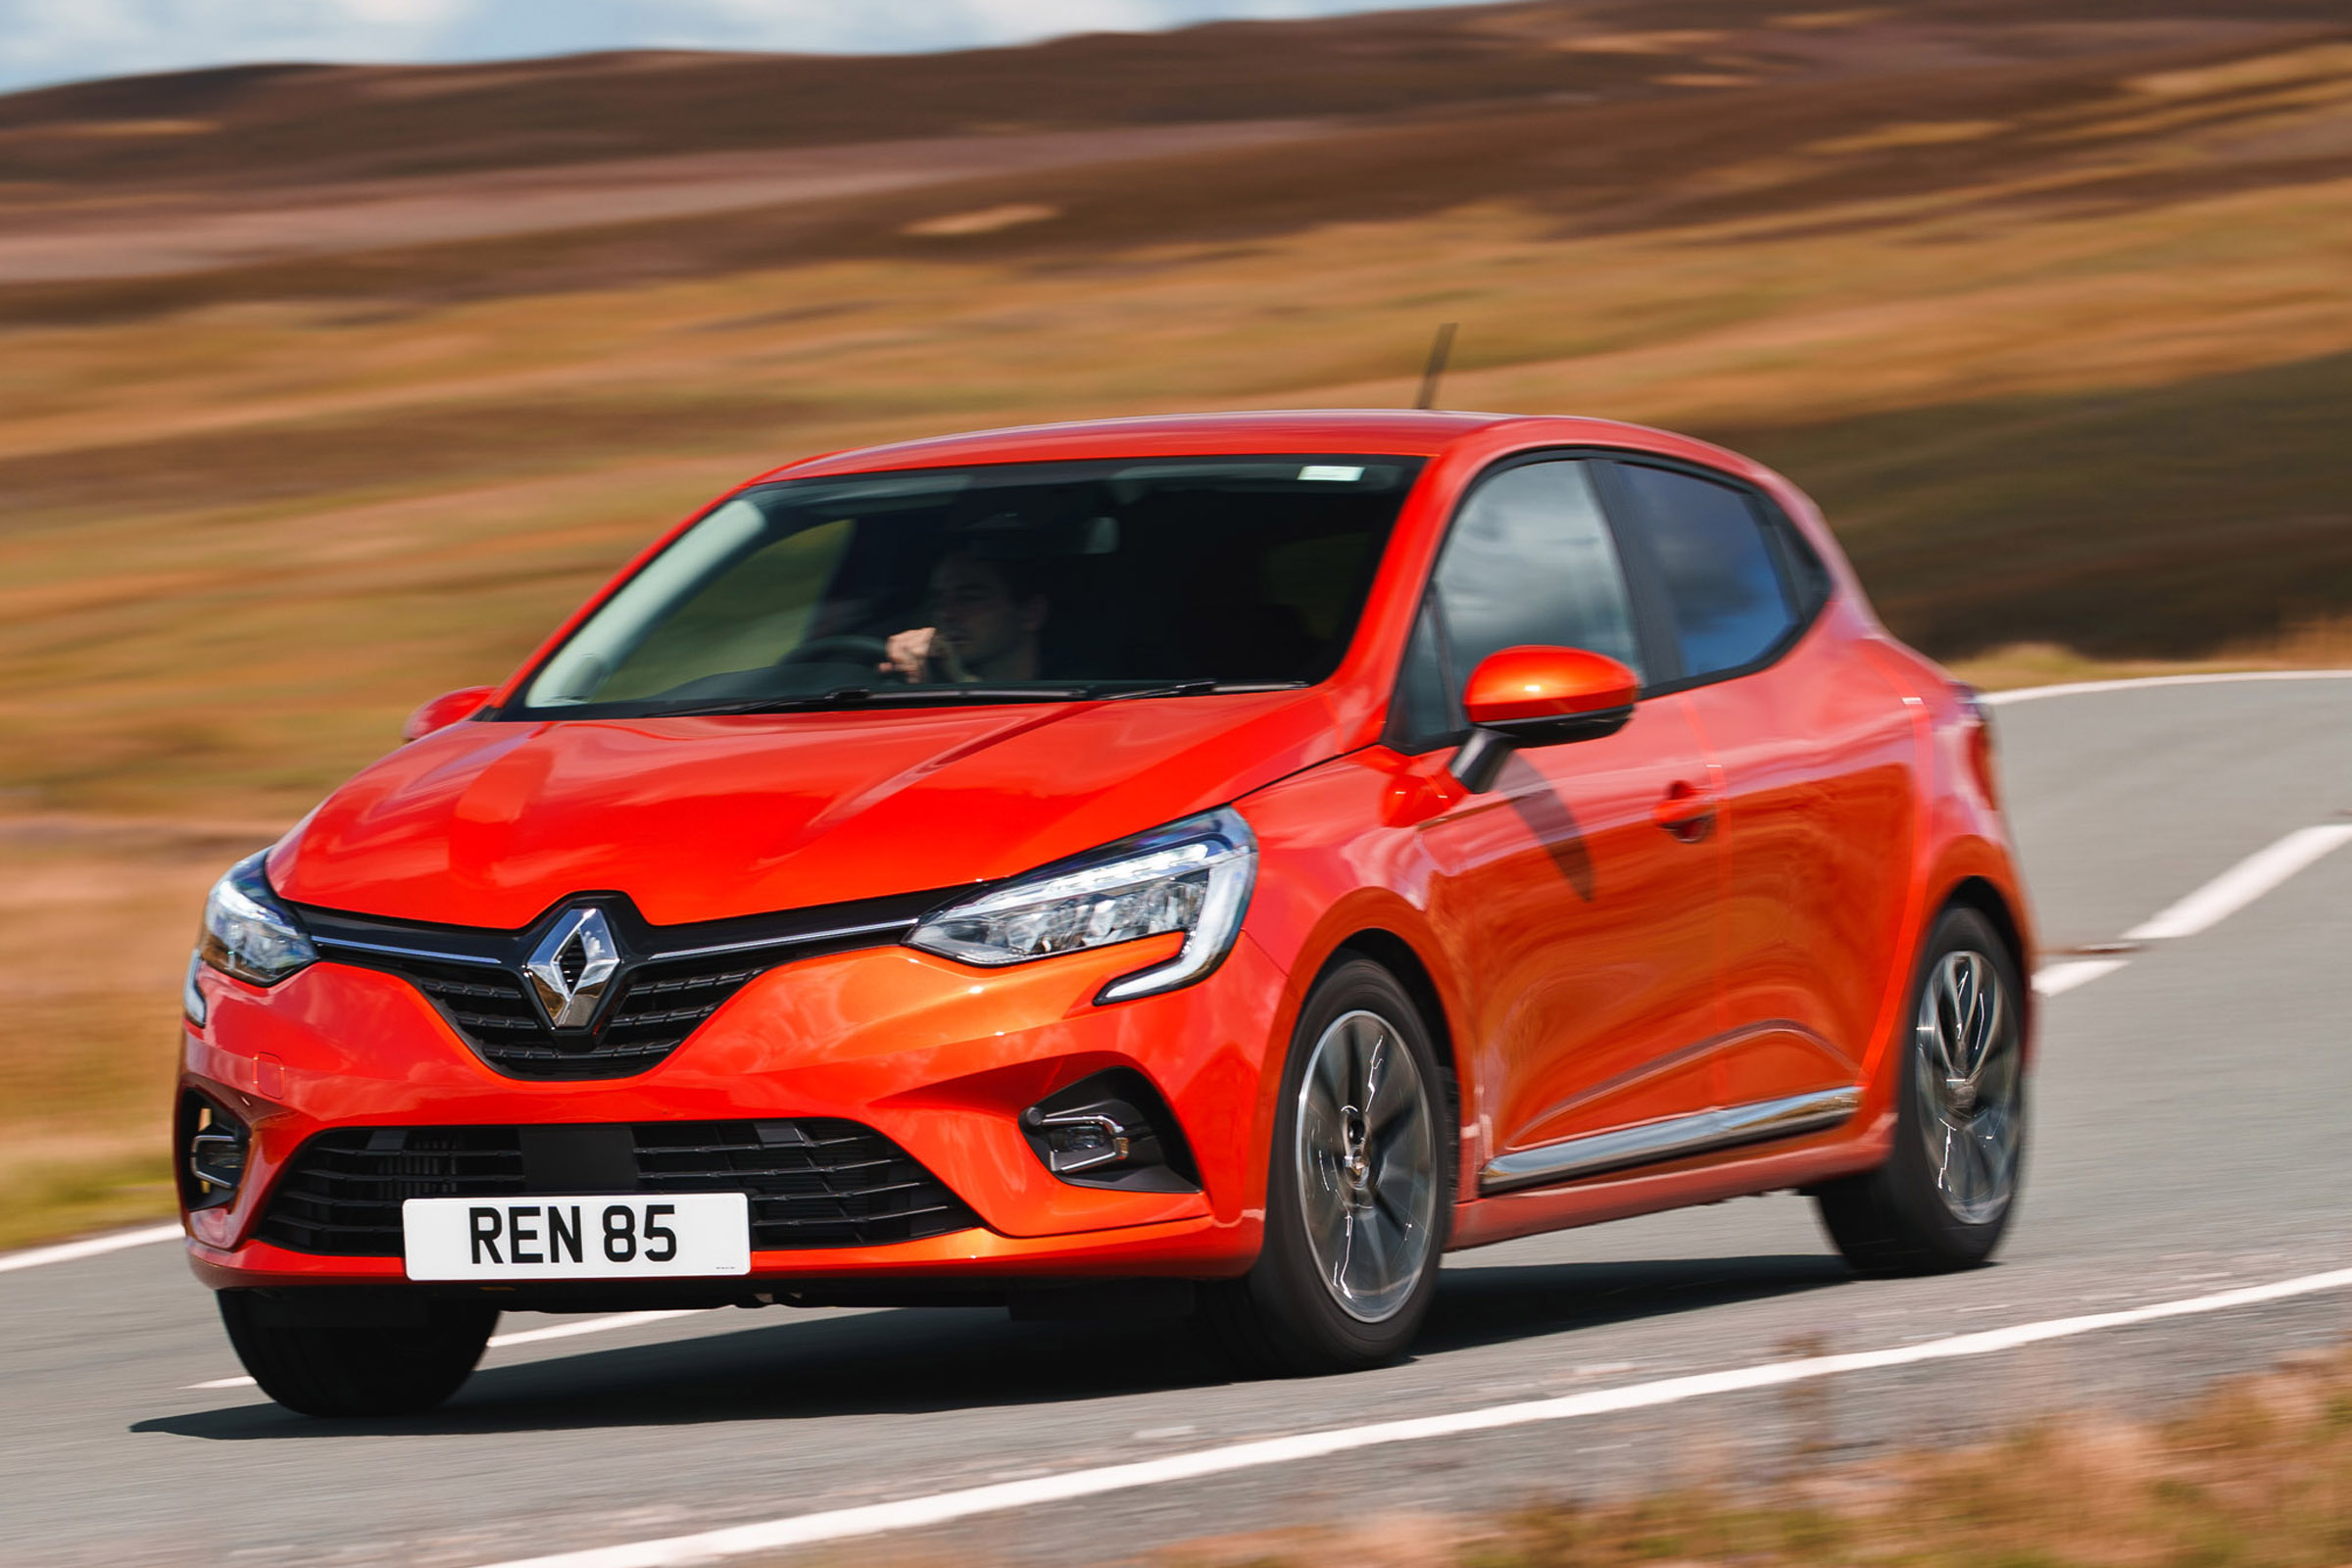 Renault Clio hd wallpapers 1080p download